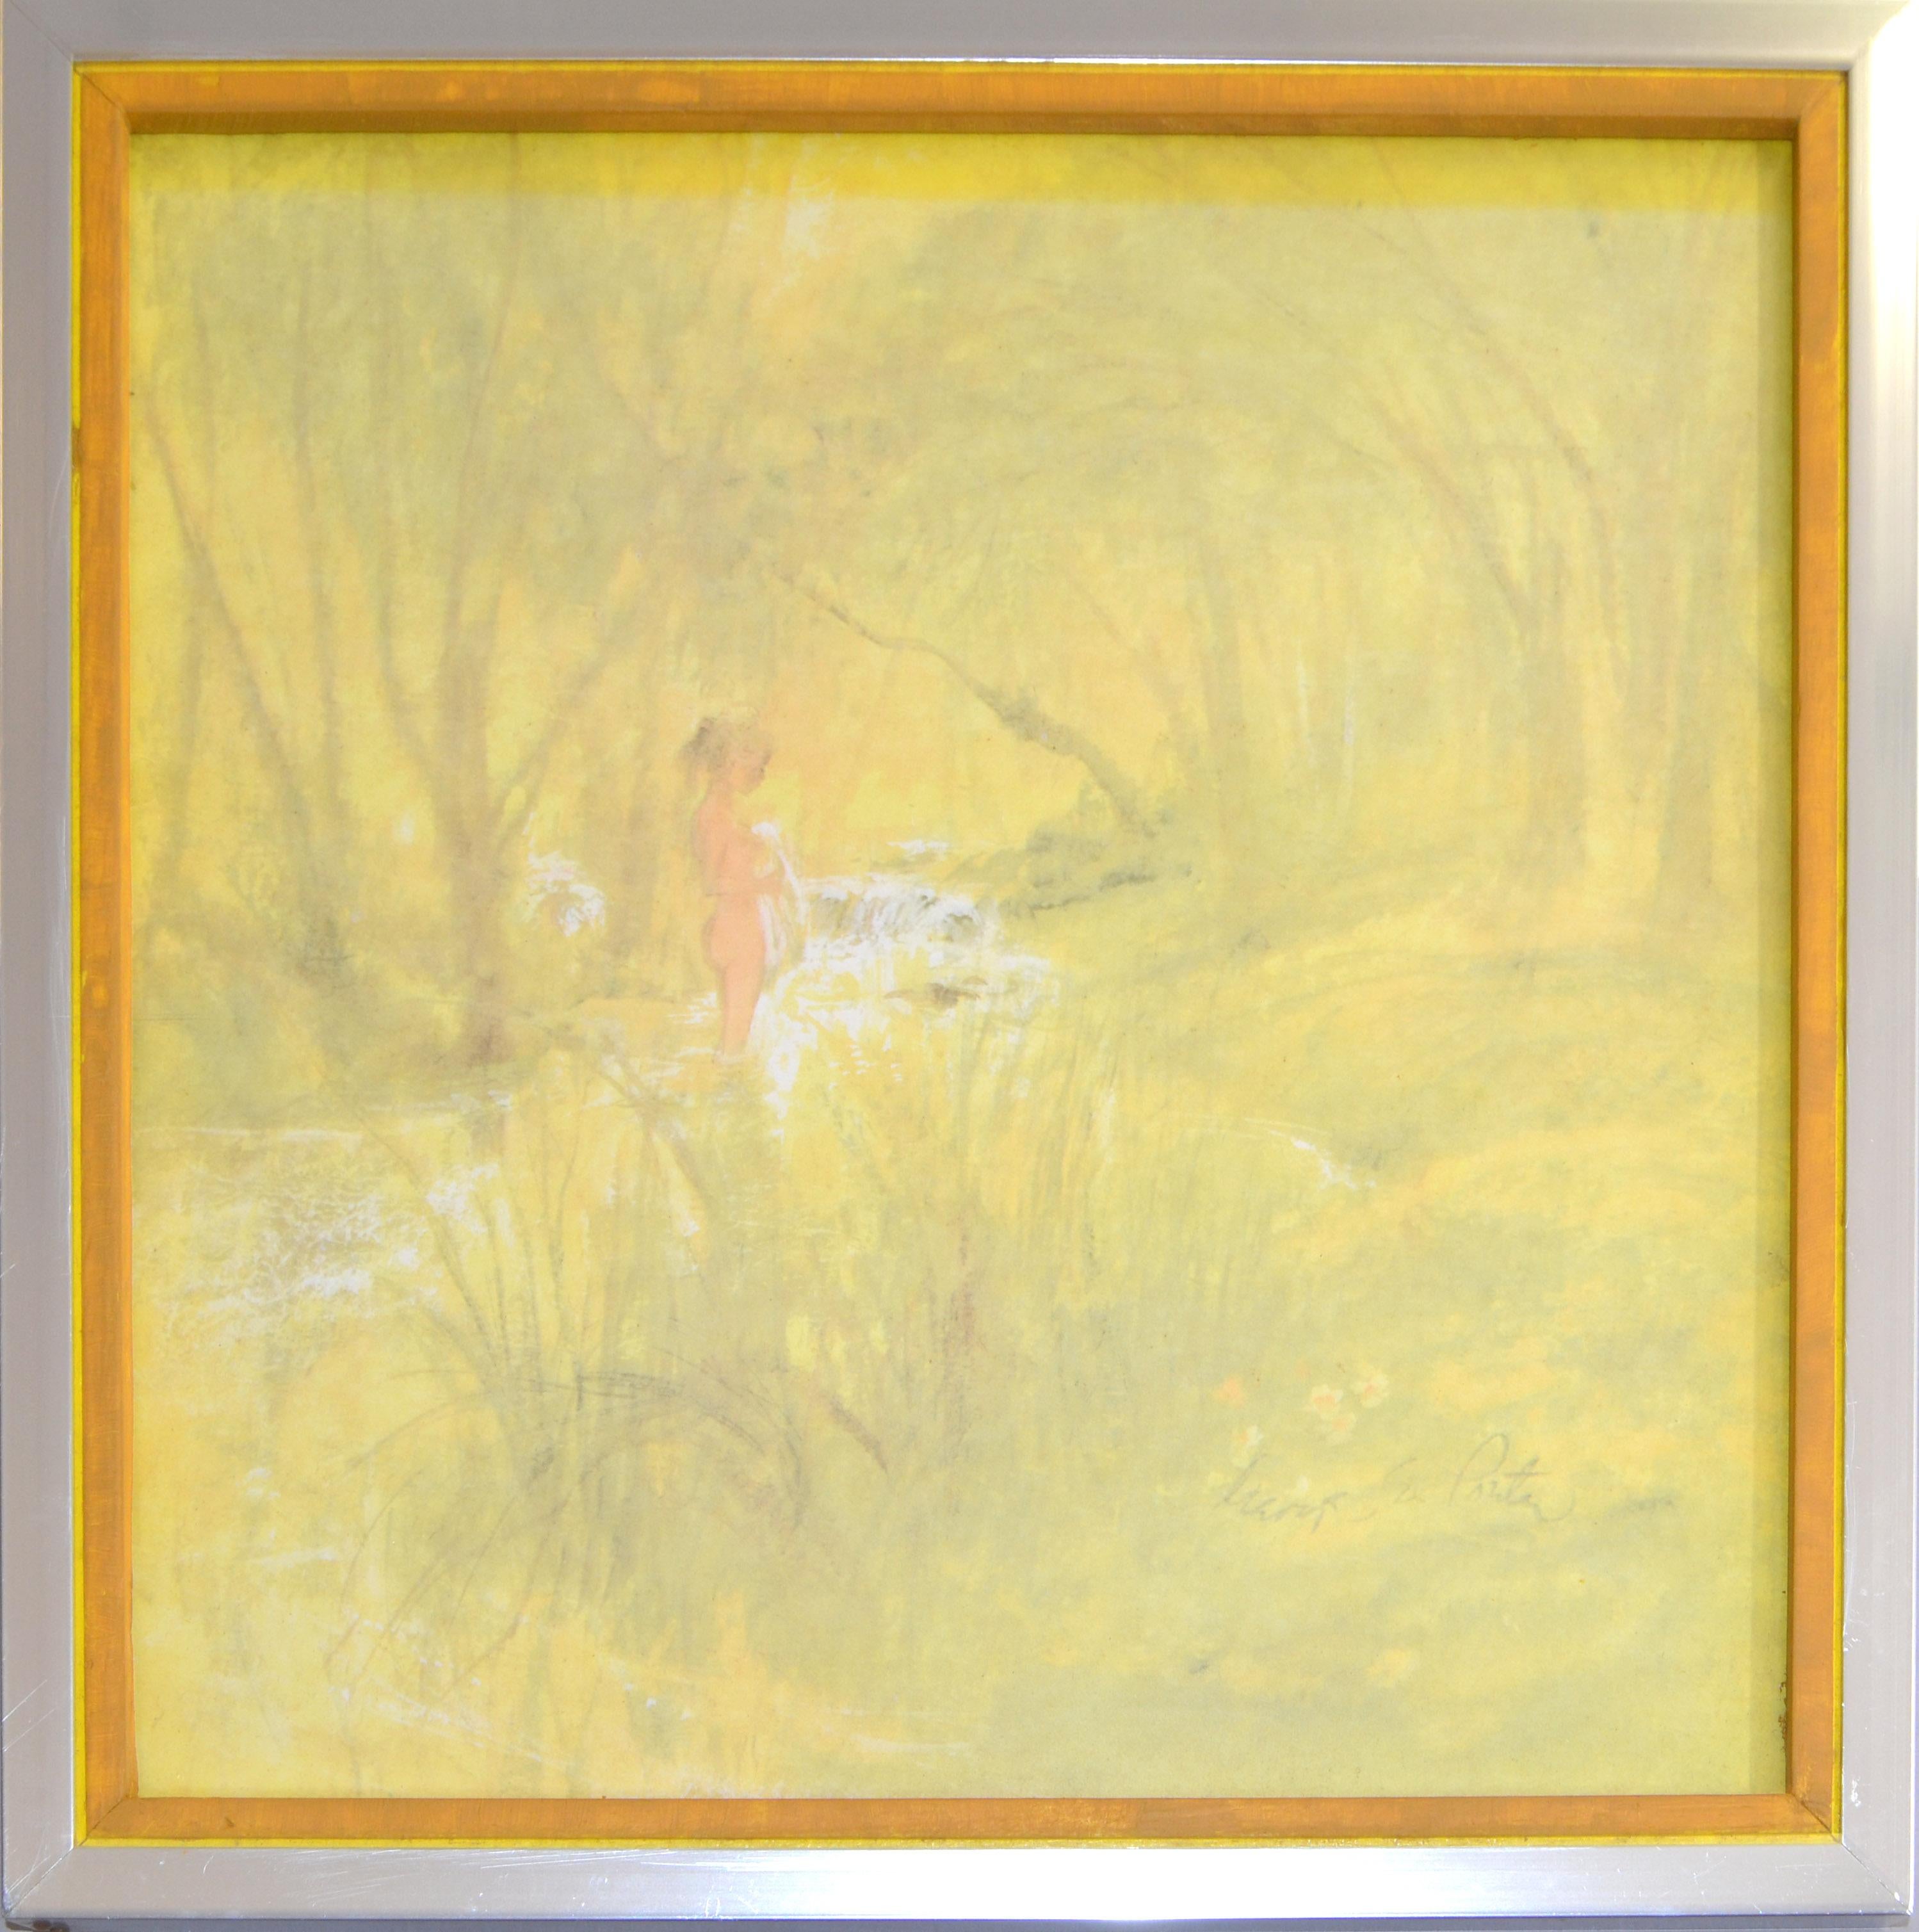 Signed Square Chrome Framed Landscape and Nude Watercolor painting on canvas over cardboard.
Very mellow hues of yellow colors depicting a Nude Girl bathing at the Creek.
Signed on the Artwork. 
Painting without the frame measures: 11.38 x 11.38